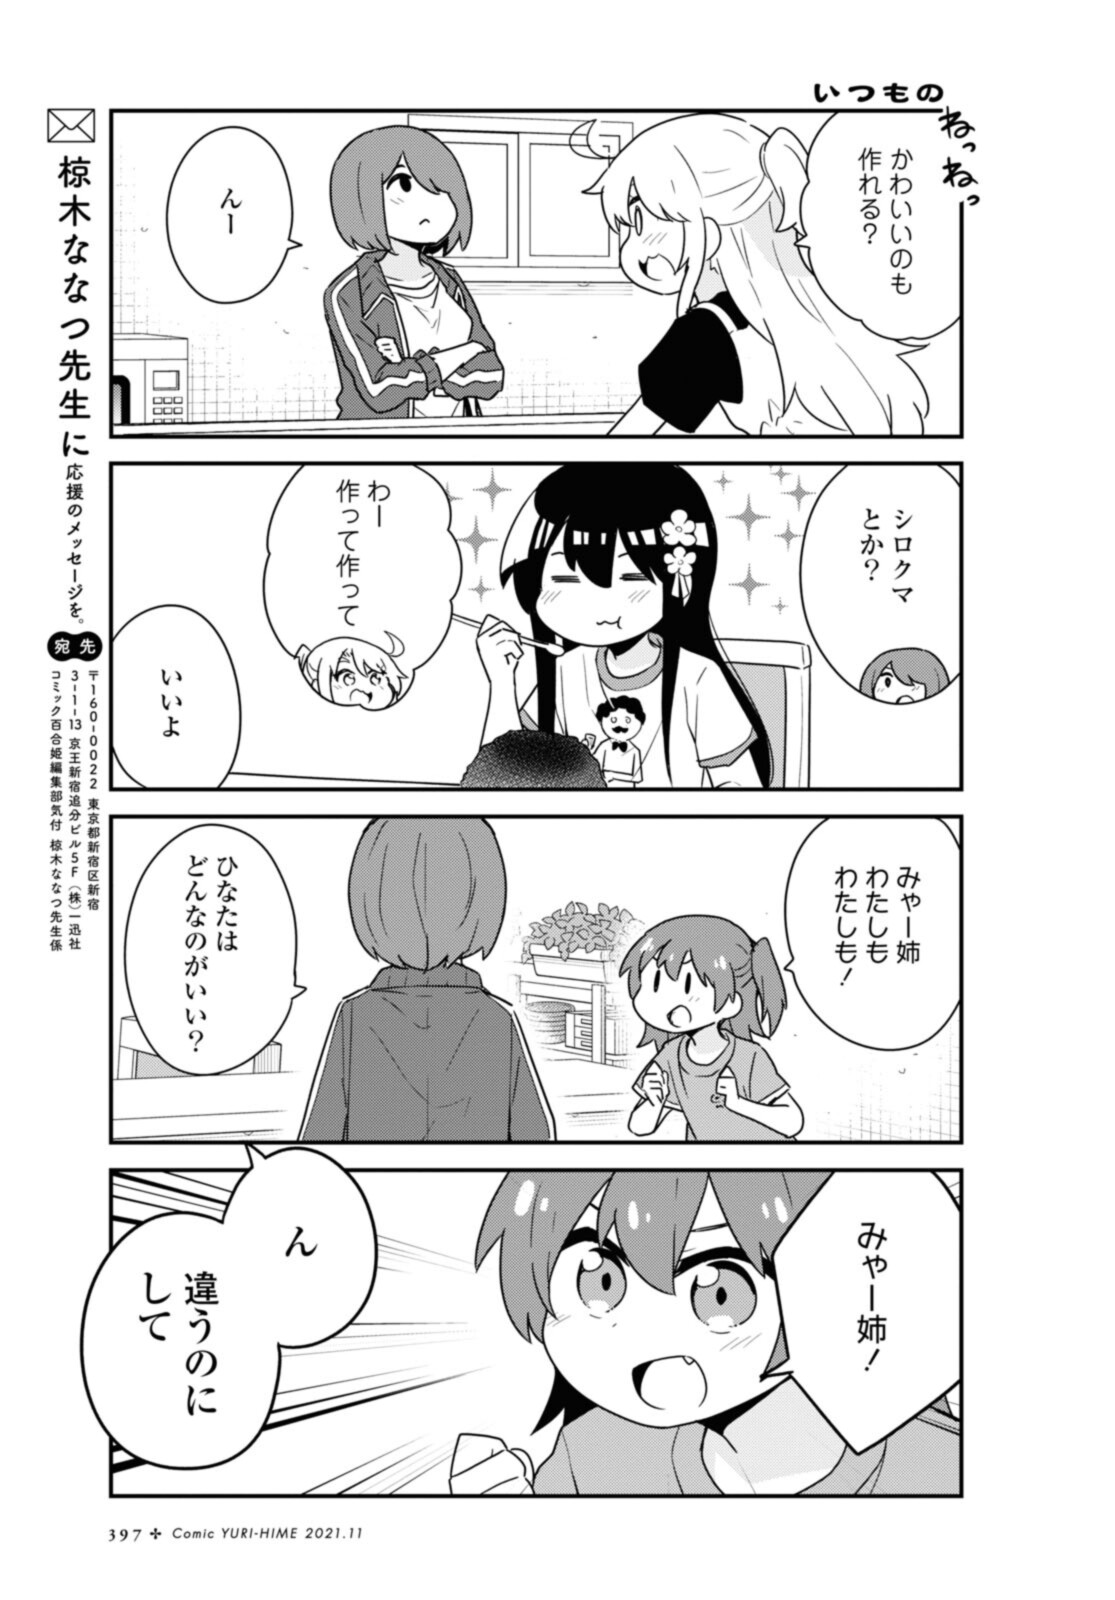 Wataten! An Angel Flew Down to Me 私に天使が舞い降りた！ 第88話 - Page 10